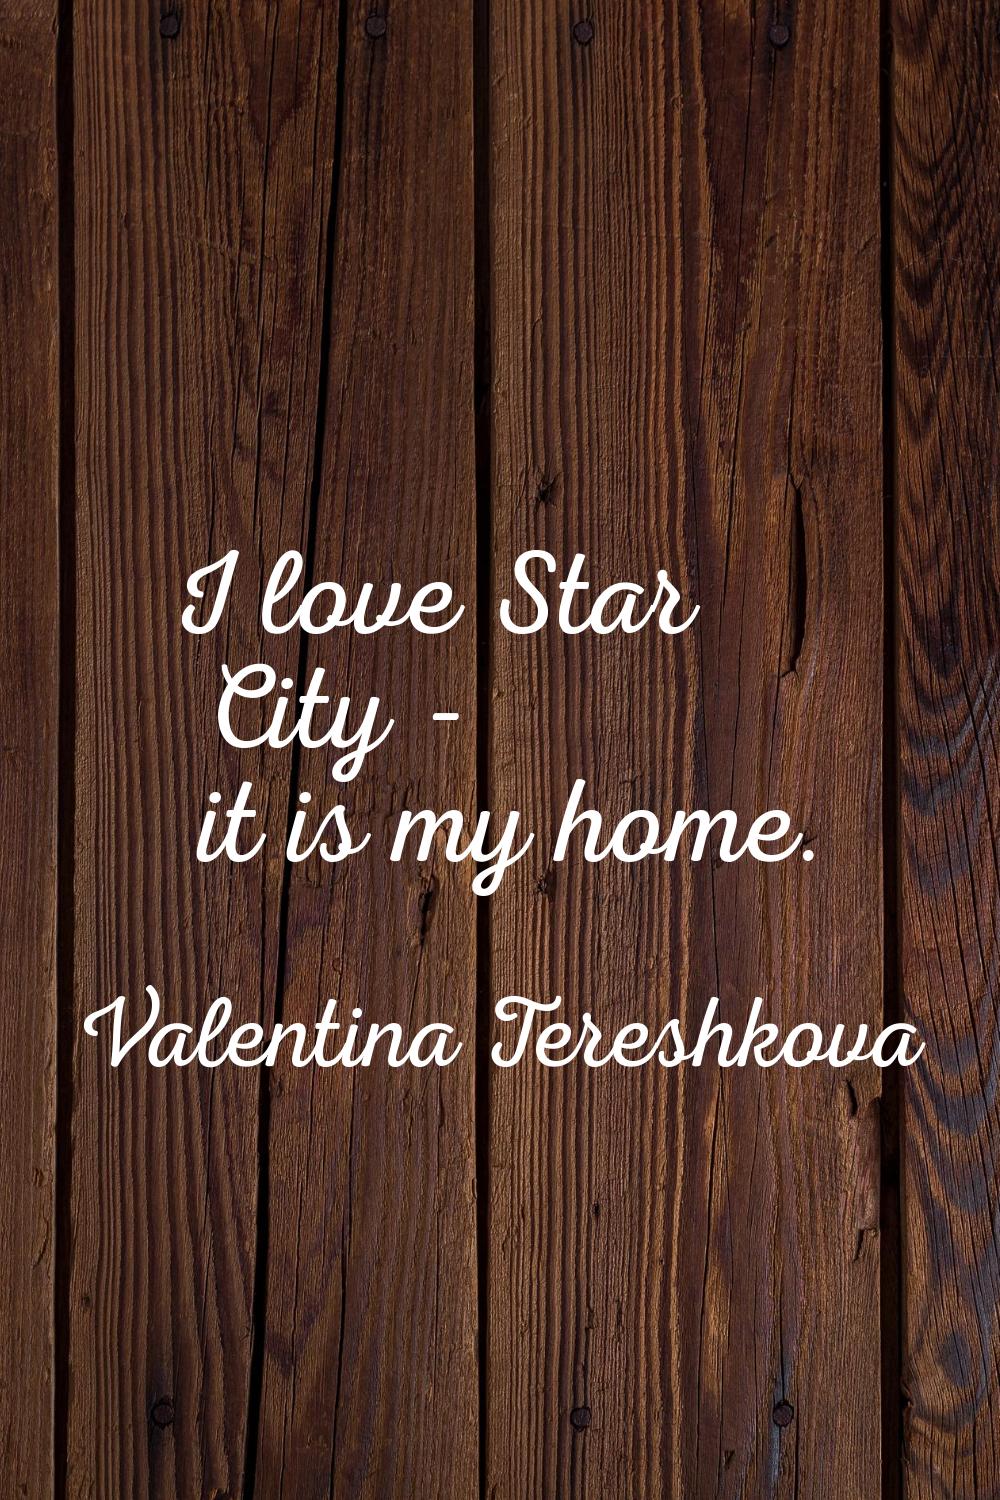 I love Star City - it is my home.